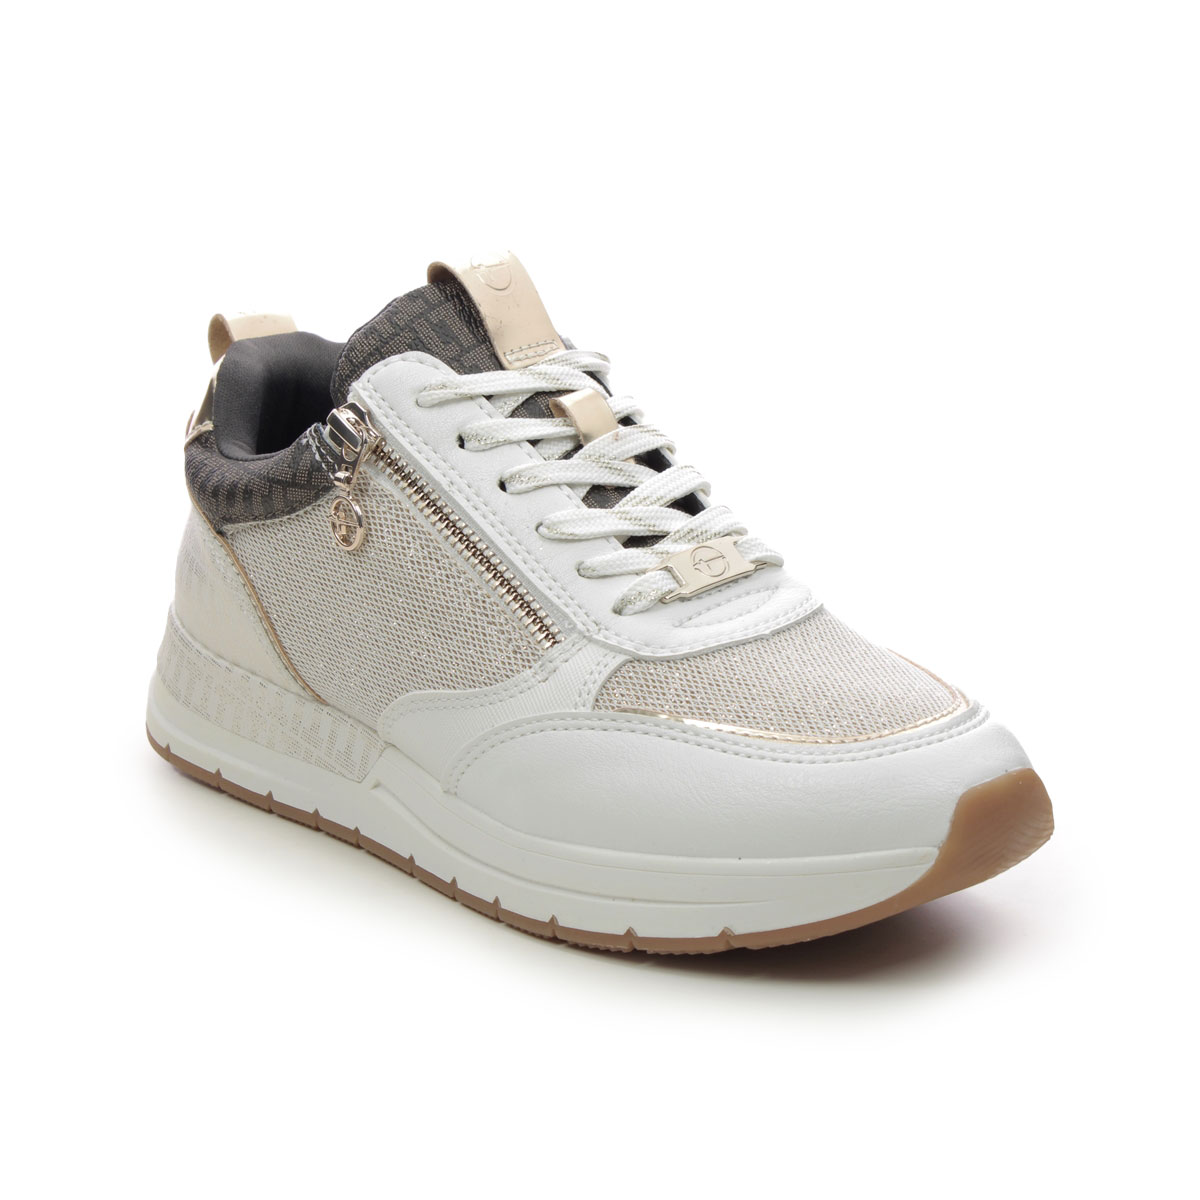 Tamaris Alminia Zip Ivory Womens trainers 23732-41-4A0 in a Plain Man-made in Size 37